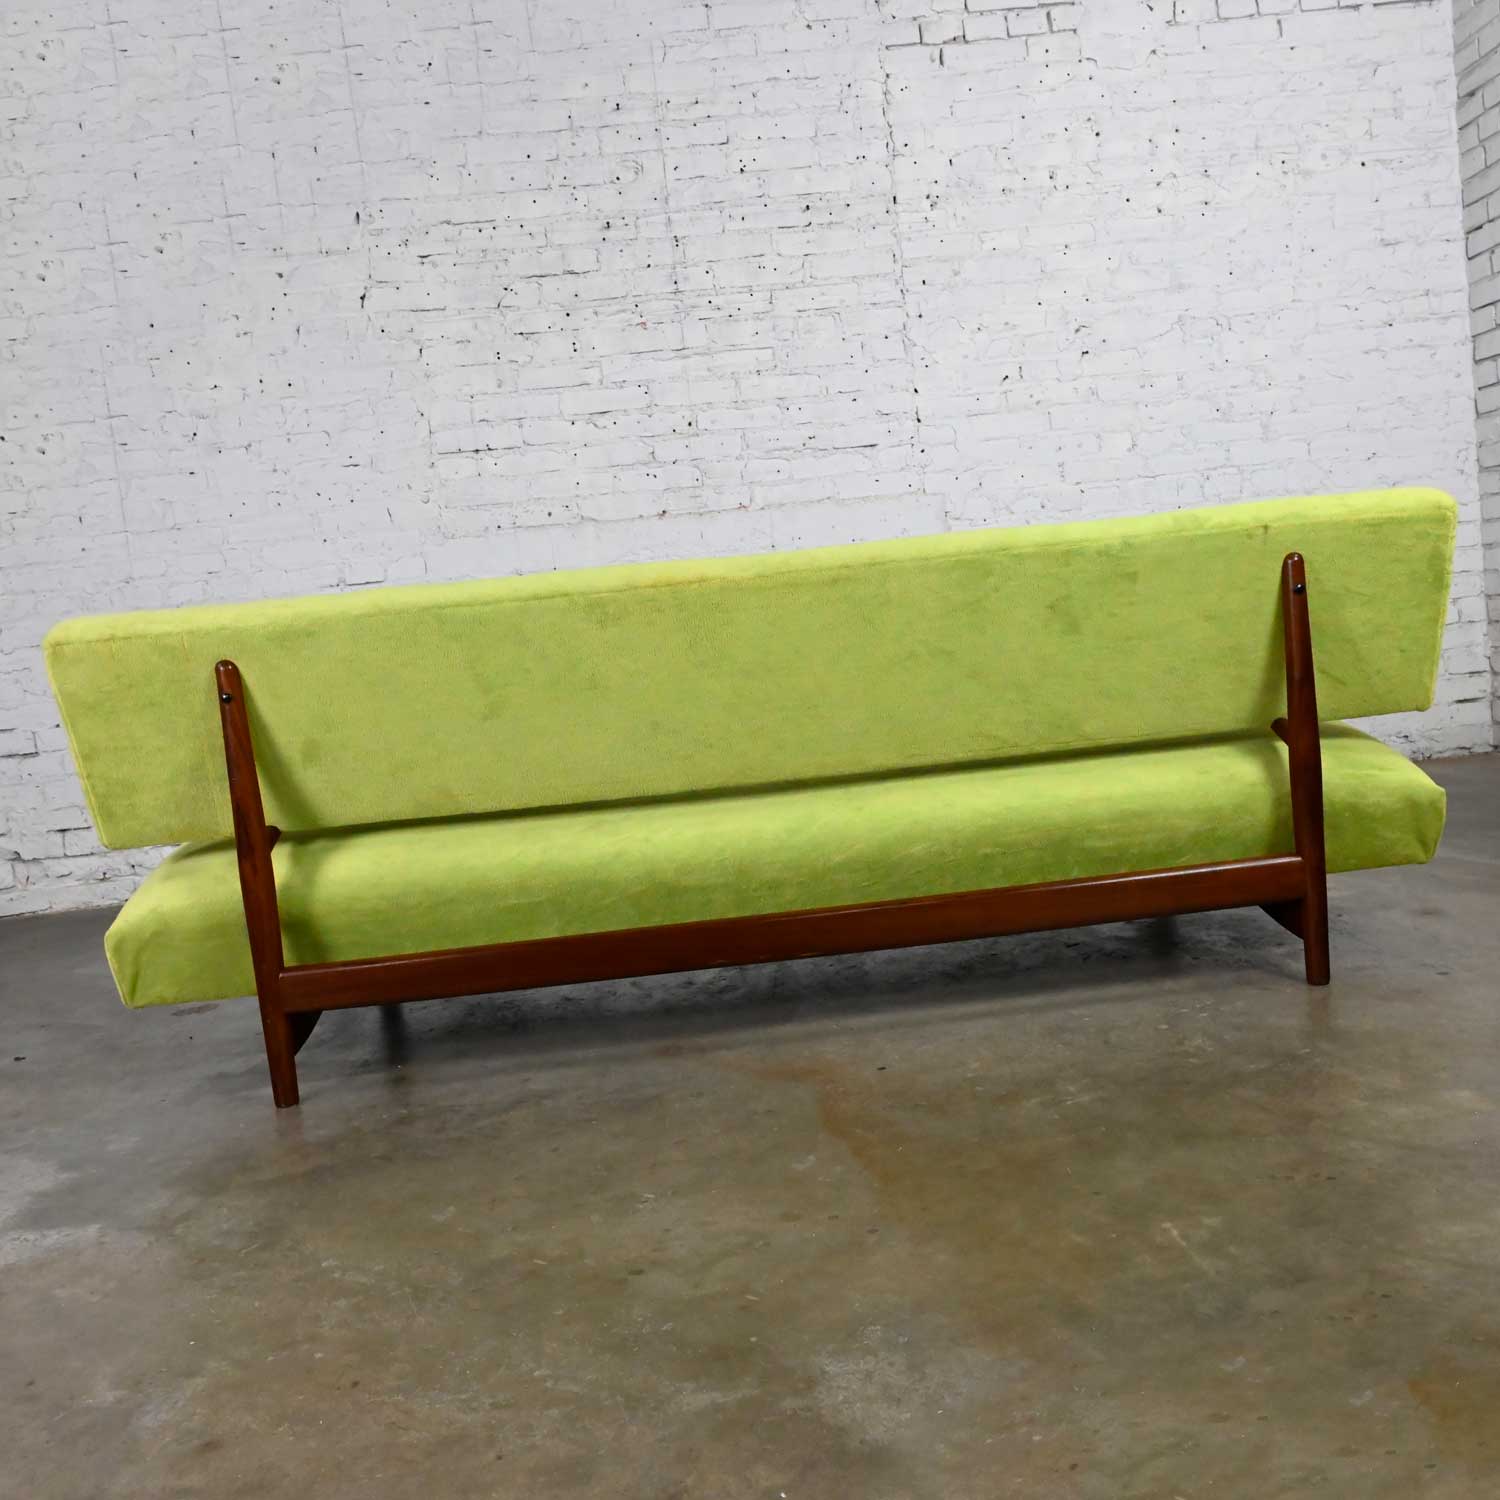 Vintage Scandinavian Modern Dutch Sofa Attributed to Doublet Sofa by Rob Parry for Gelderland